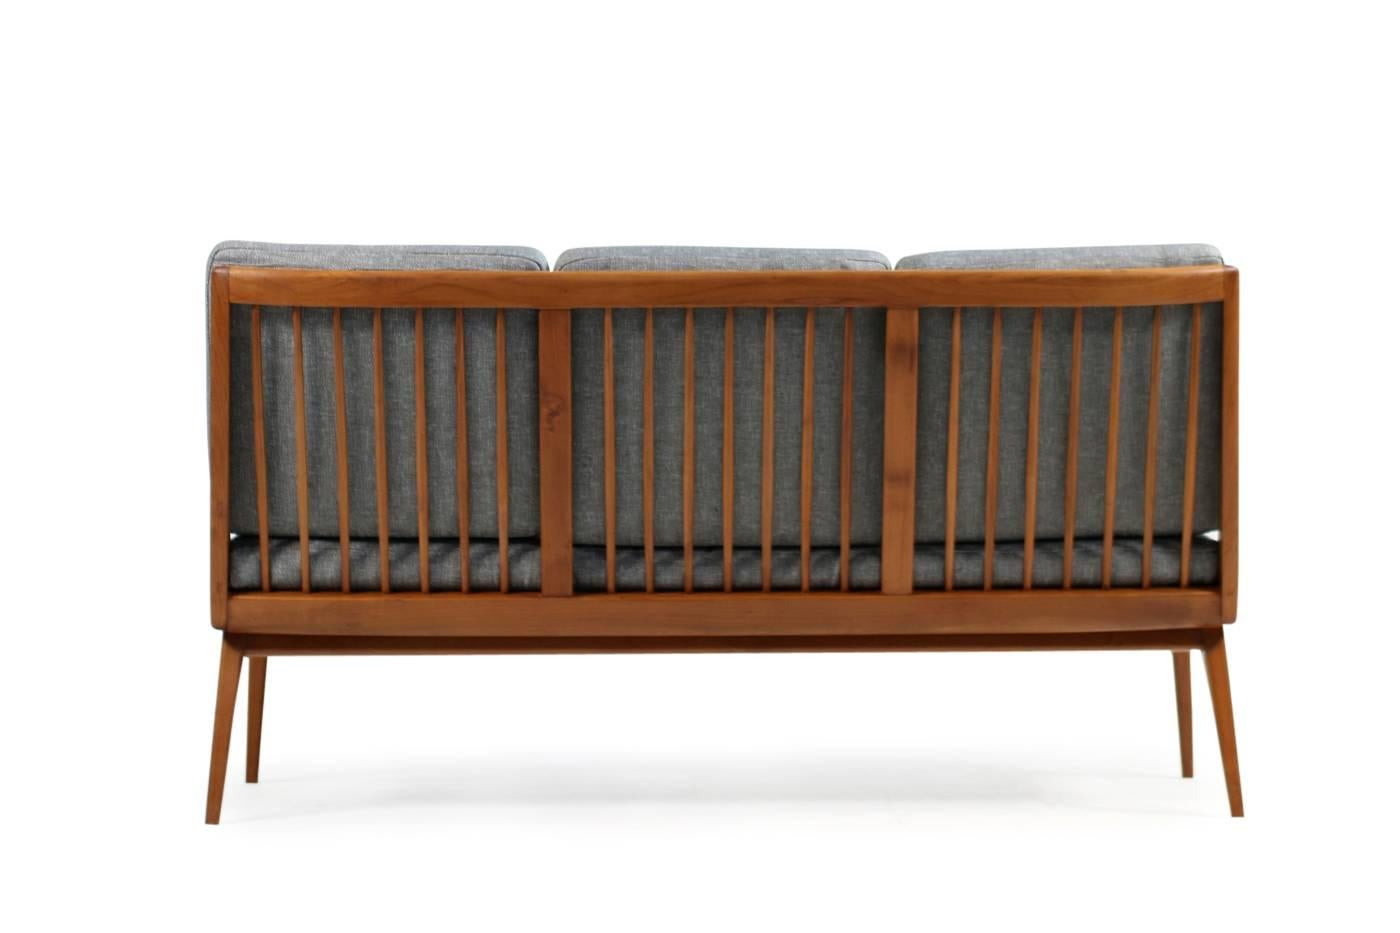 Rare Hans Mitzlaff Boomerang sofa or bench for ES Eugen Schmidt, Germany 1950s it was designed in 1953 here in solid cherrywood frame, cushions were made a few years ago and are still in a great condition, signed underneath. Beautiful Mid-Century